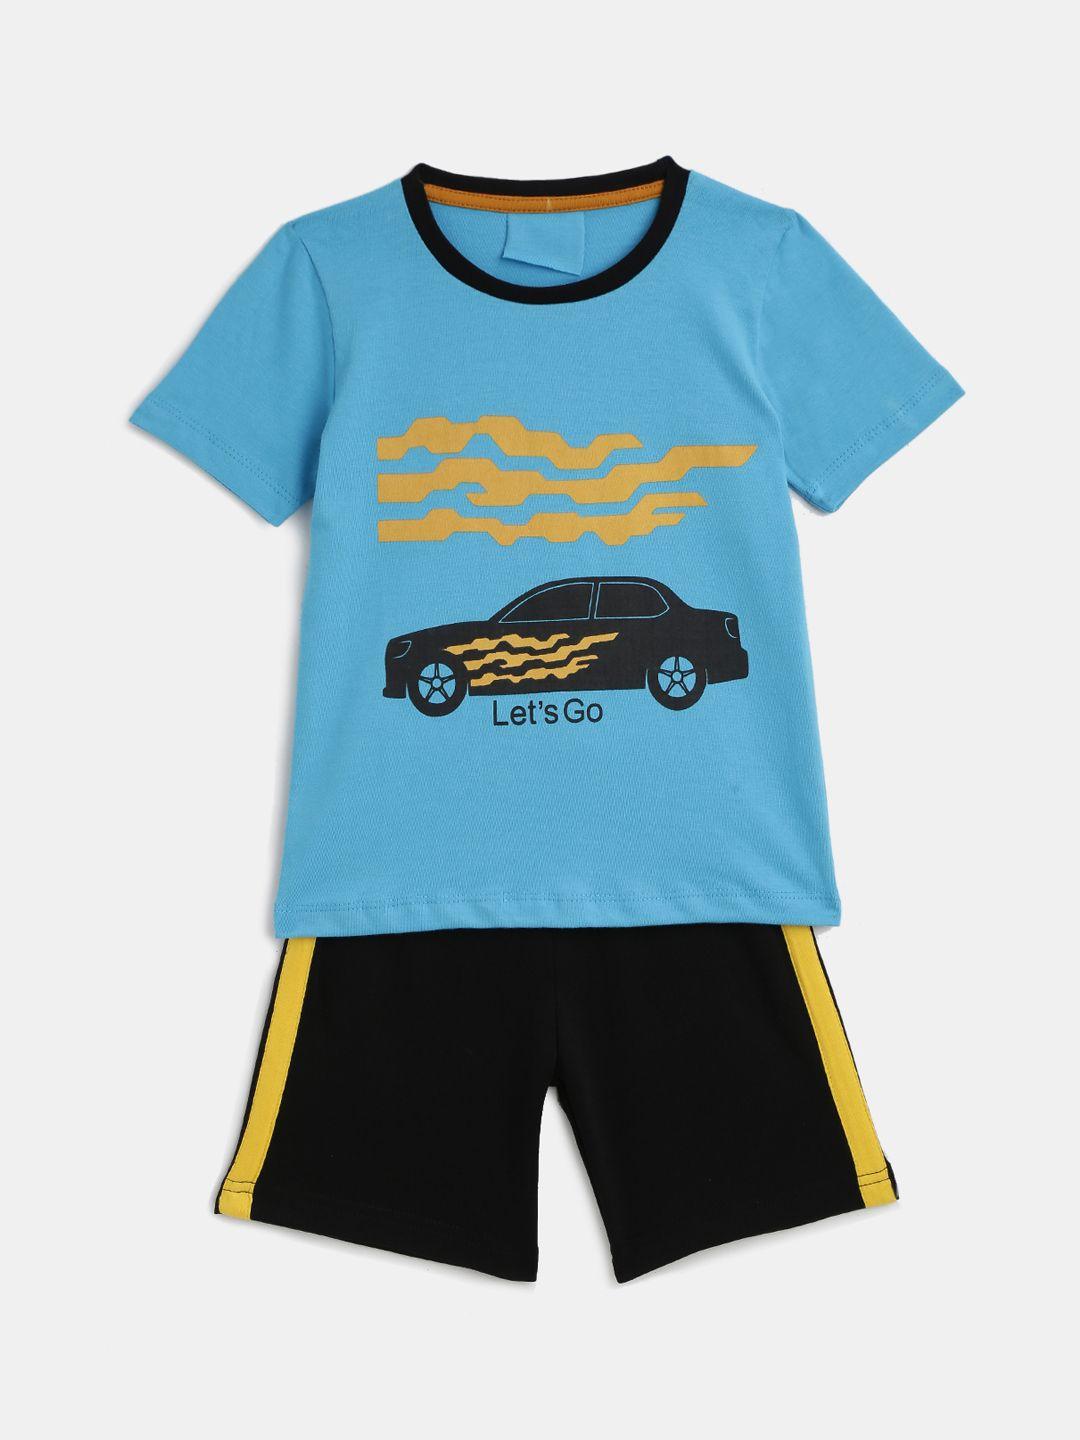 kidscraft-boys-turquoise-blue-&-black-printed-t-shirt-with-shorts